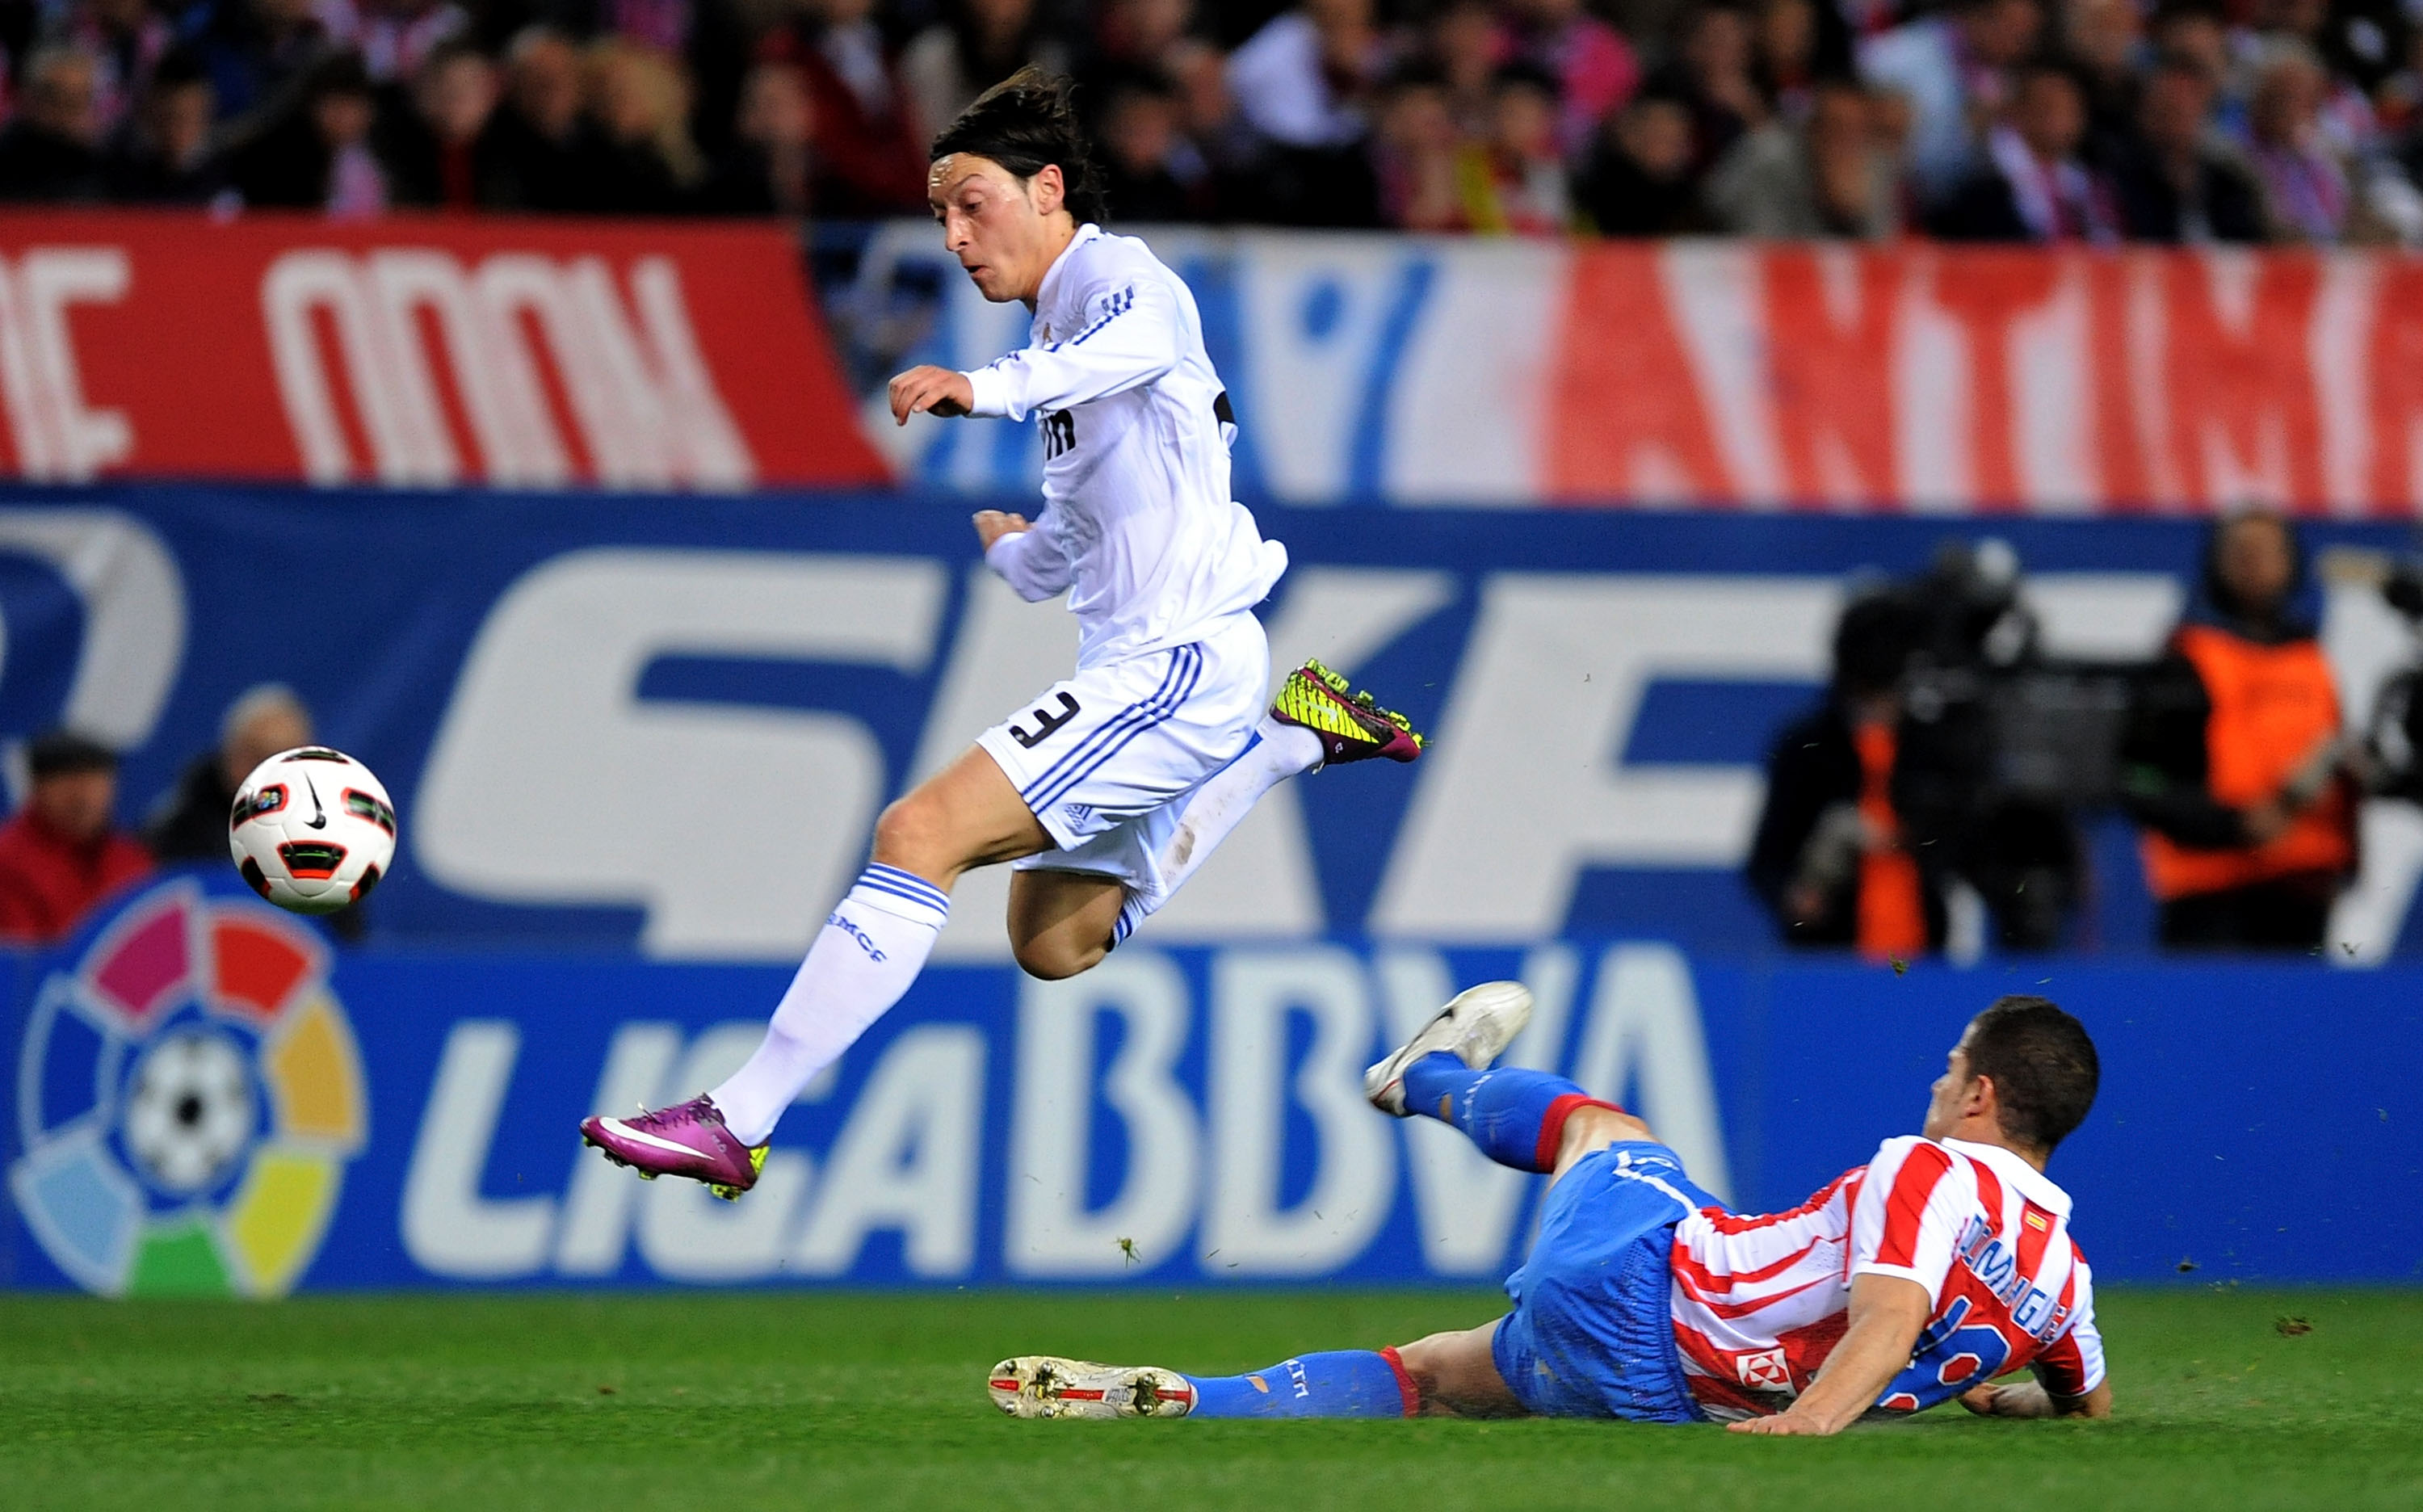 MADRID, SPAIN - MARCH 19:  Mesut Ozil (L) of Real Madrid avoids a late tackle by Alvaro Dominguez of Atletico Madrid during the La Liga match between Atletico Madrid and Real Madrid at Vicente Calderon Stadium on March 19, 2011 in Madrid, Spain.  (Photo b